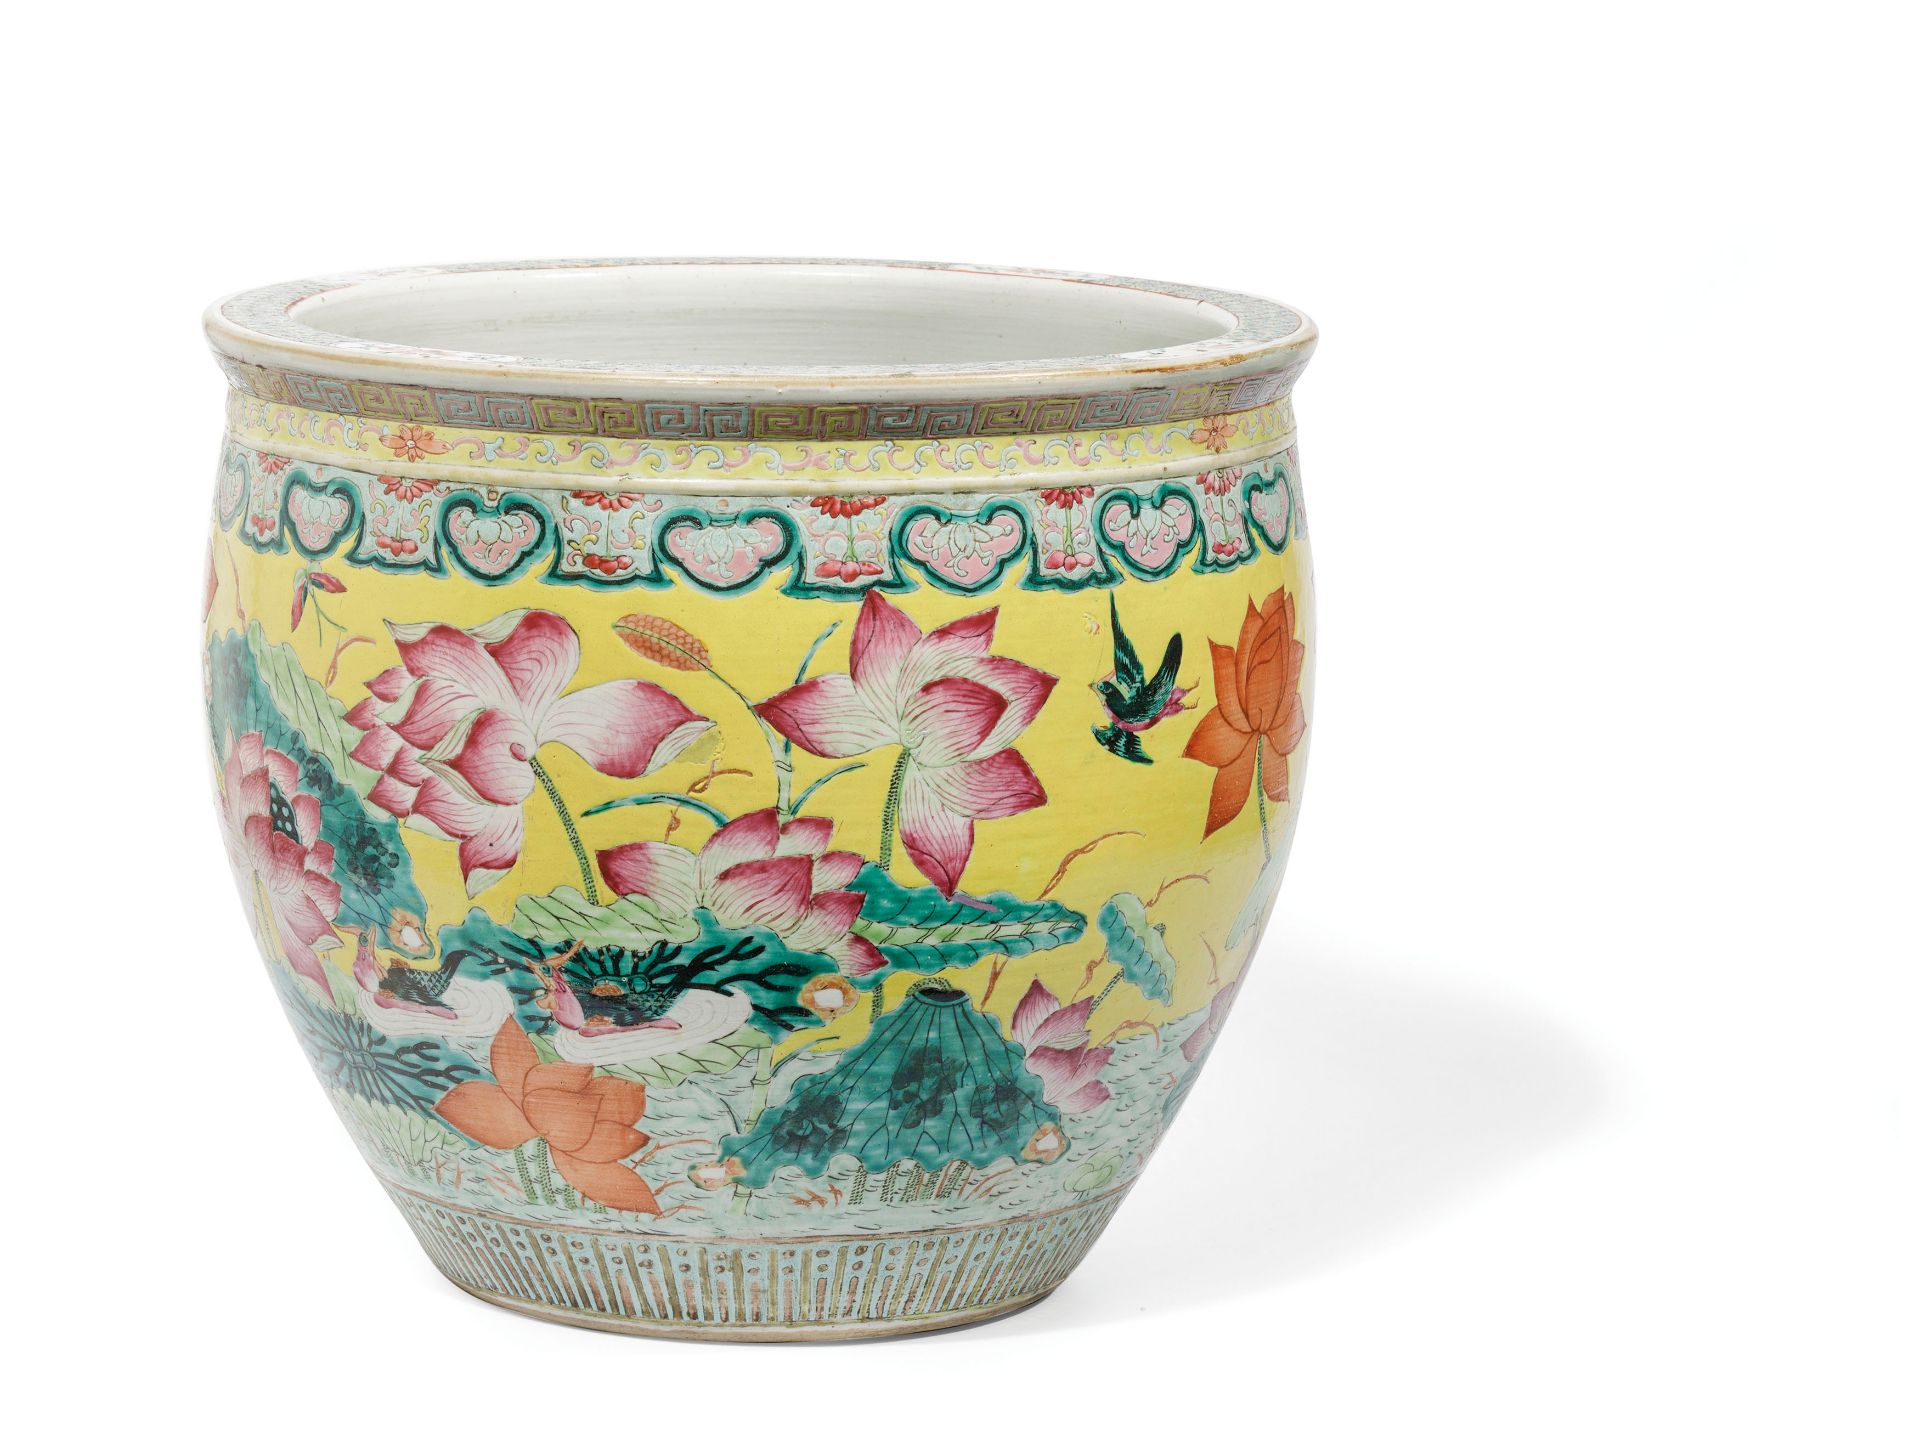 A LARGE FAMILLE ROSE PORCELAIN YELLOW GROUND FISH BOWL, CHINA, 19TH -20TH CENTURY